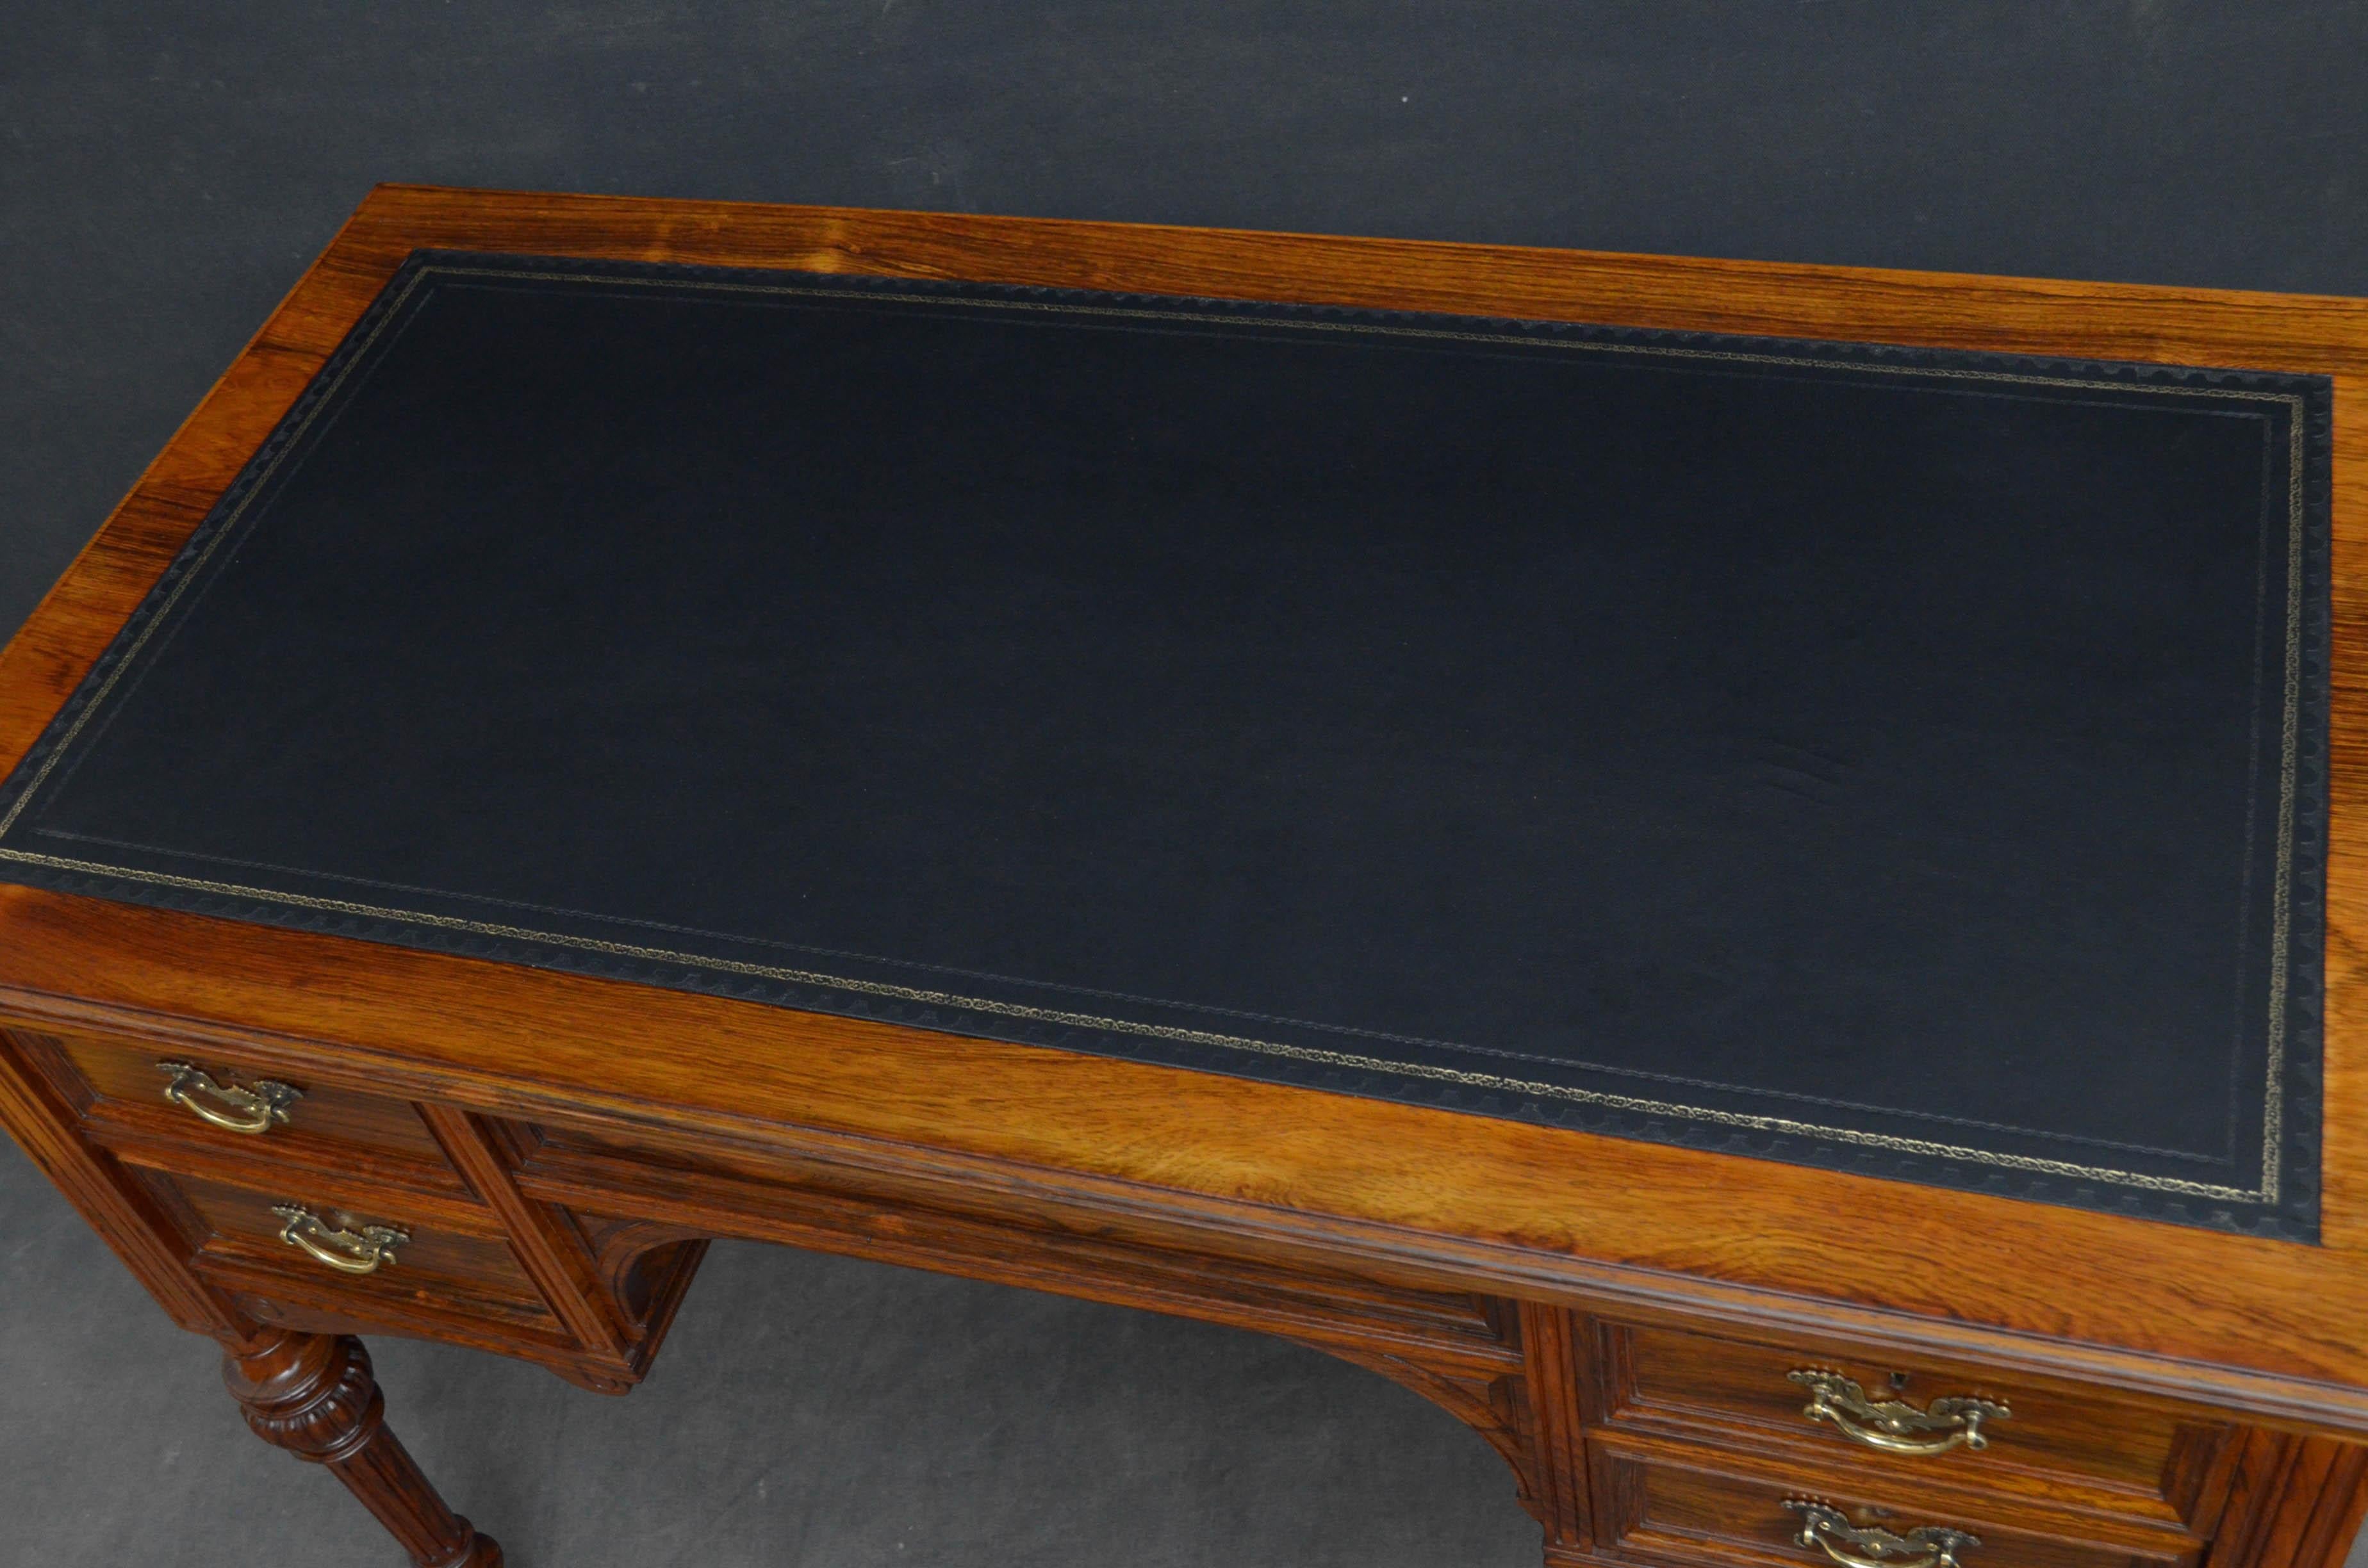 Sn4755, superb quality Victorian writing table in rosewood, having black tooled leather writing surface above panelled frieze and 4 mahogany lined moulded drawers, all fitted with original brass handles, all standing on turned, carved and reeded